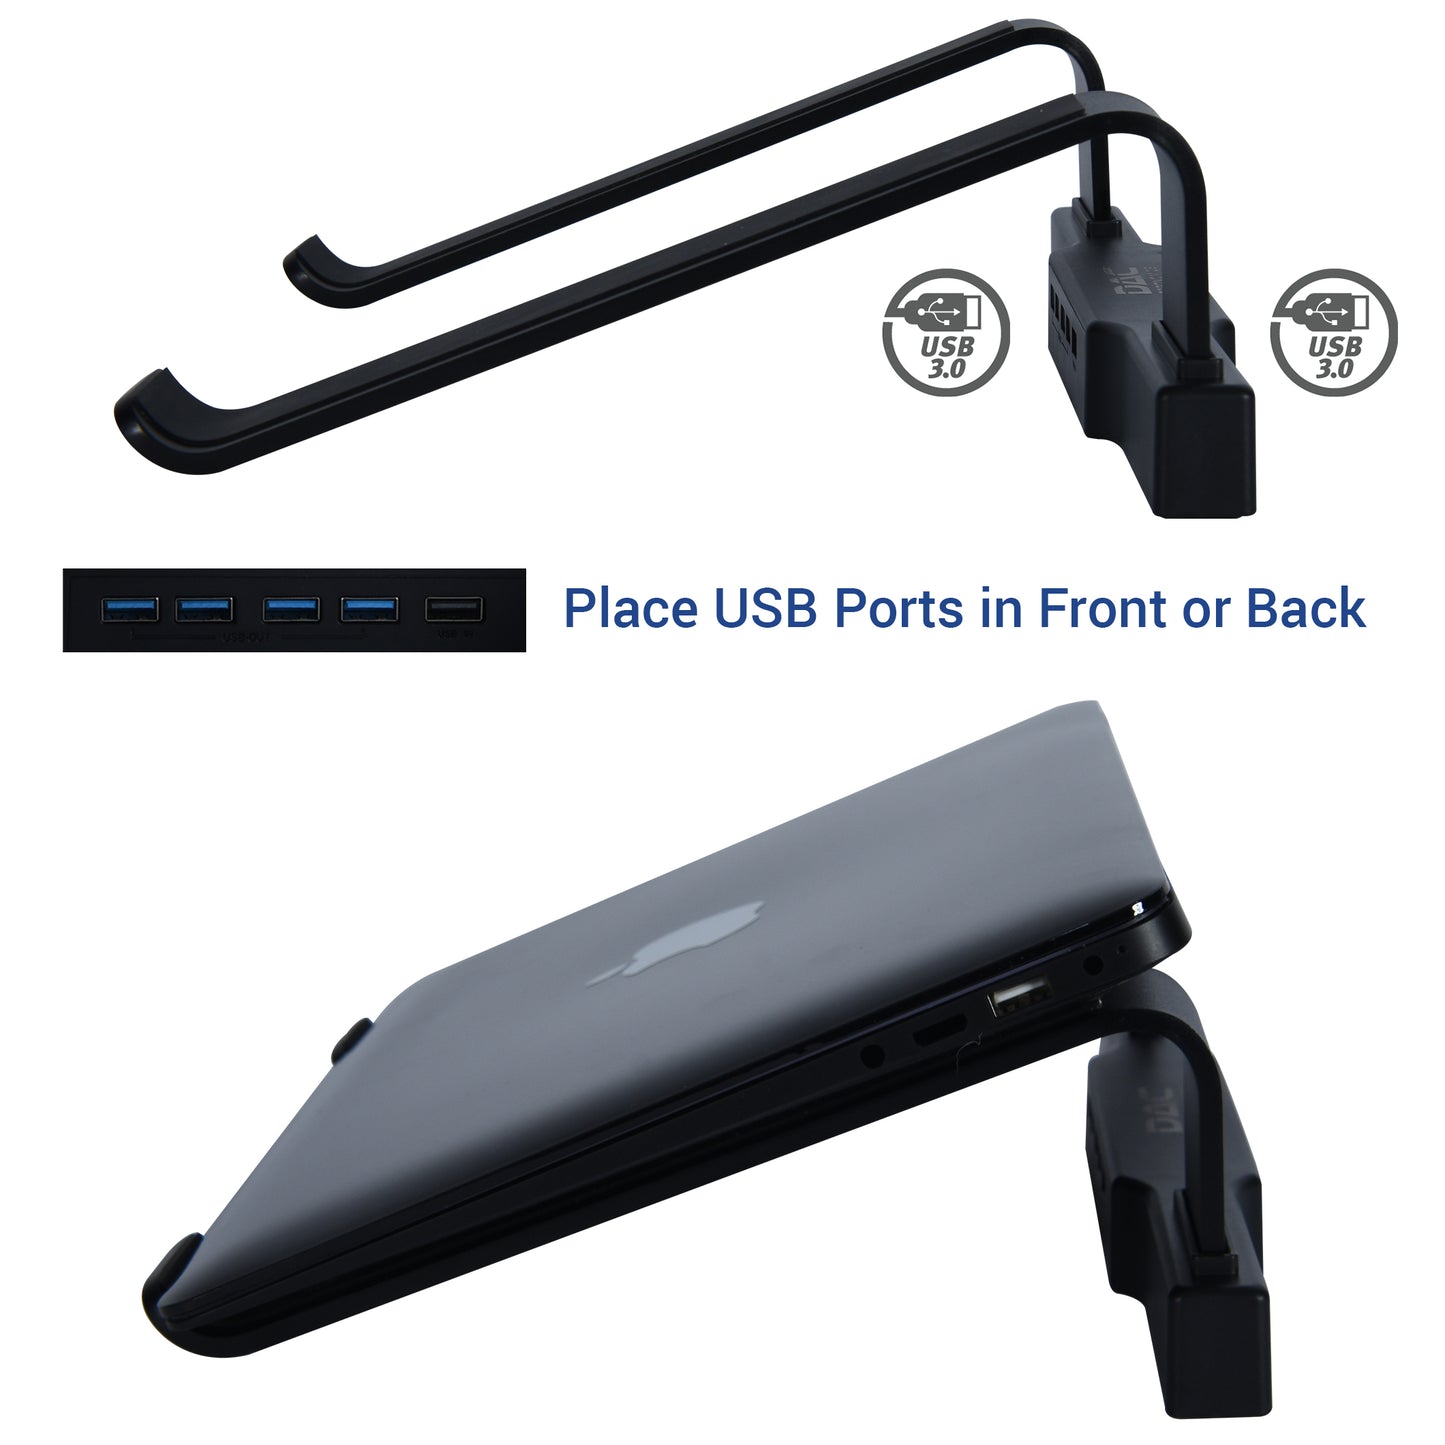 DAC® MP-220 Non-Skid Laptop Stand With 4-Port USB 3.0 Hub, Black